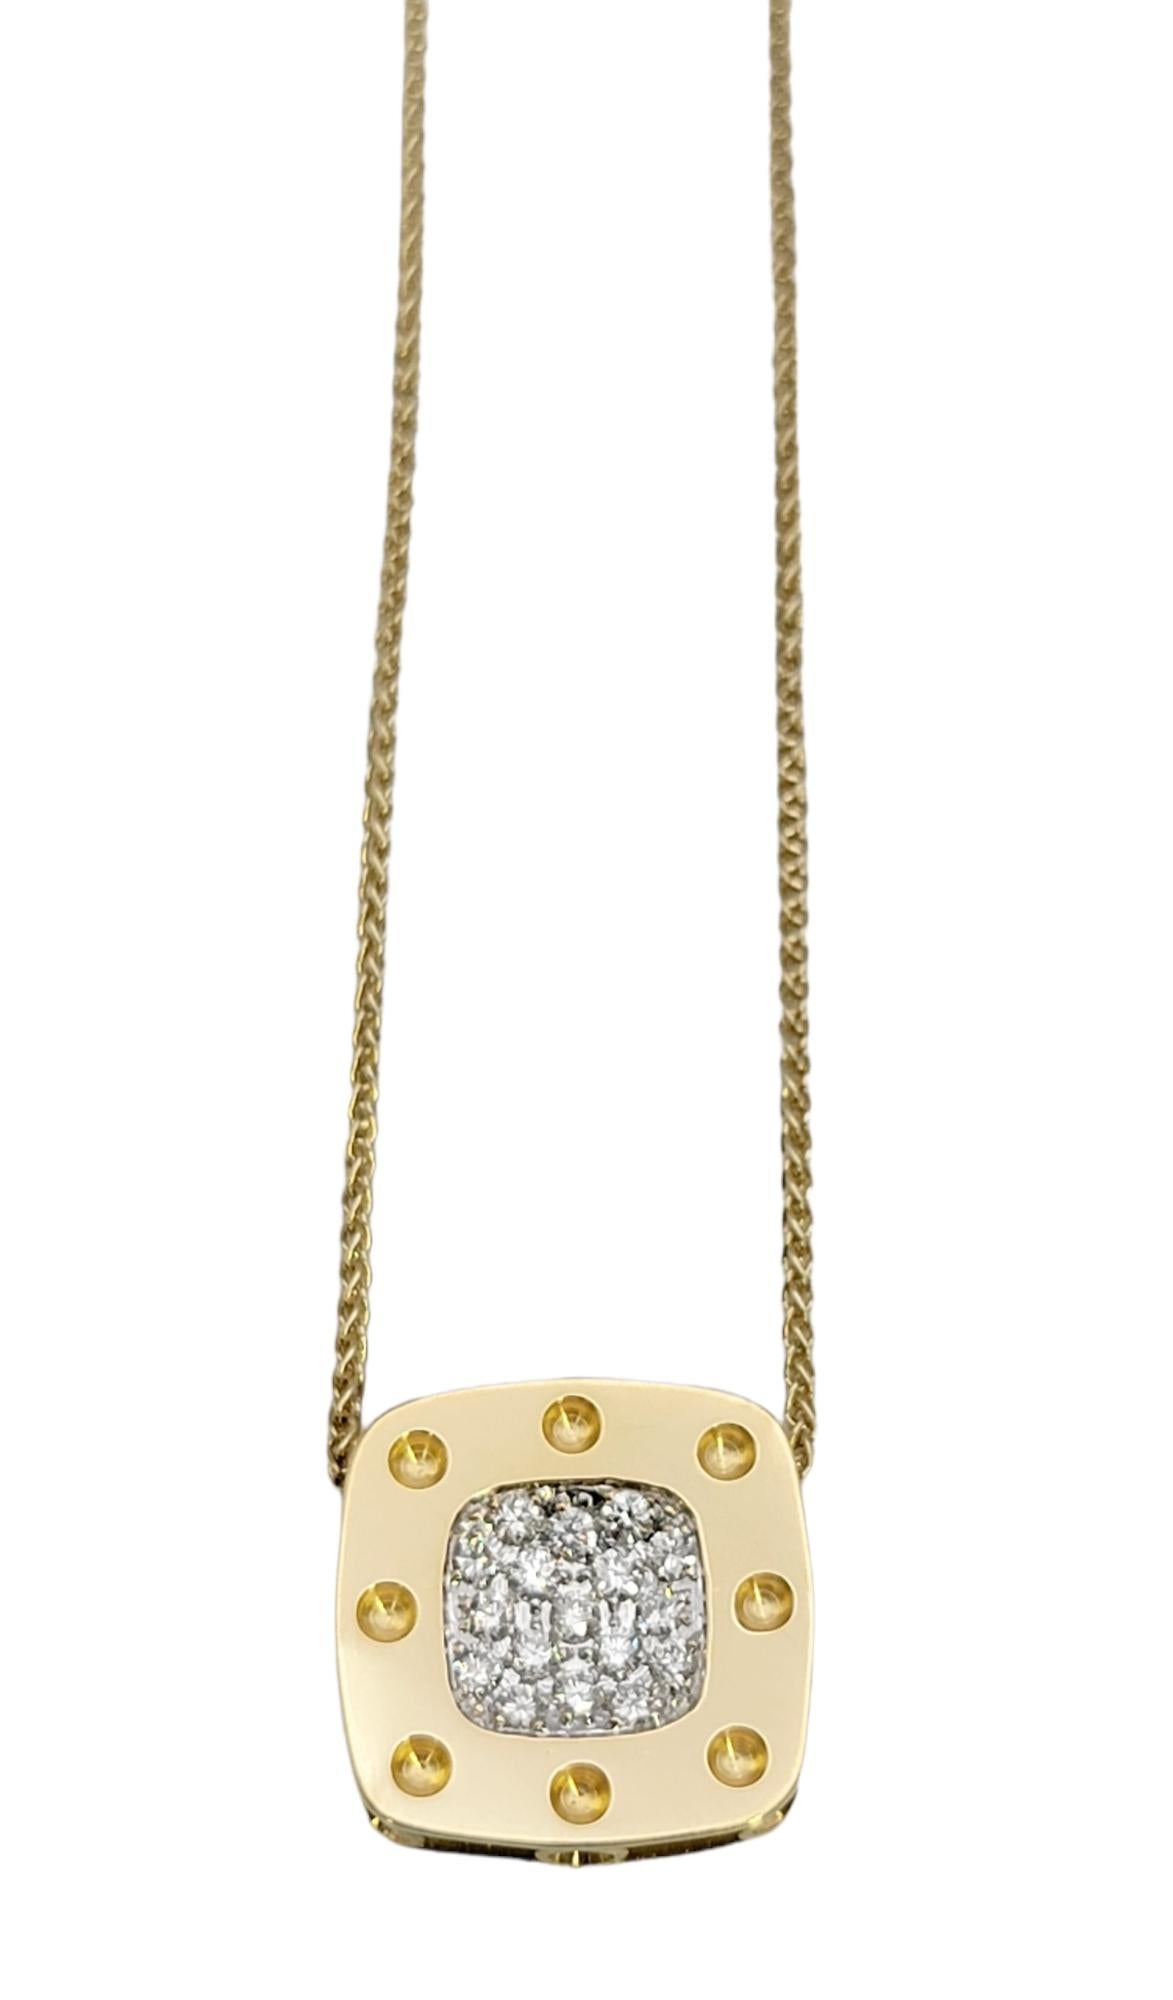 Pretty pave diamond pendant necklace by Roberto Coin. Simple, modern and chic, this piece features a polished yellow gold square pendant with circle accents and enhanced with glittering diamonds at the center. The pendant is 18 karat gold and is